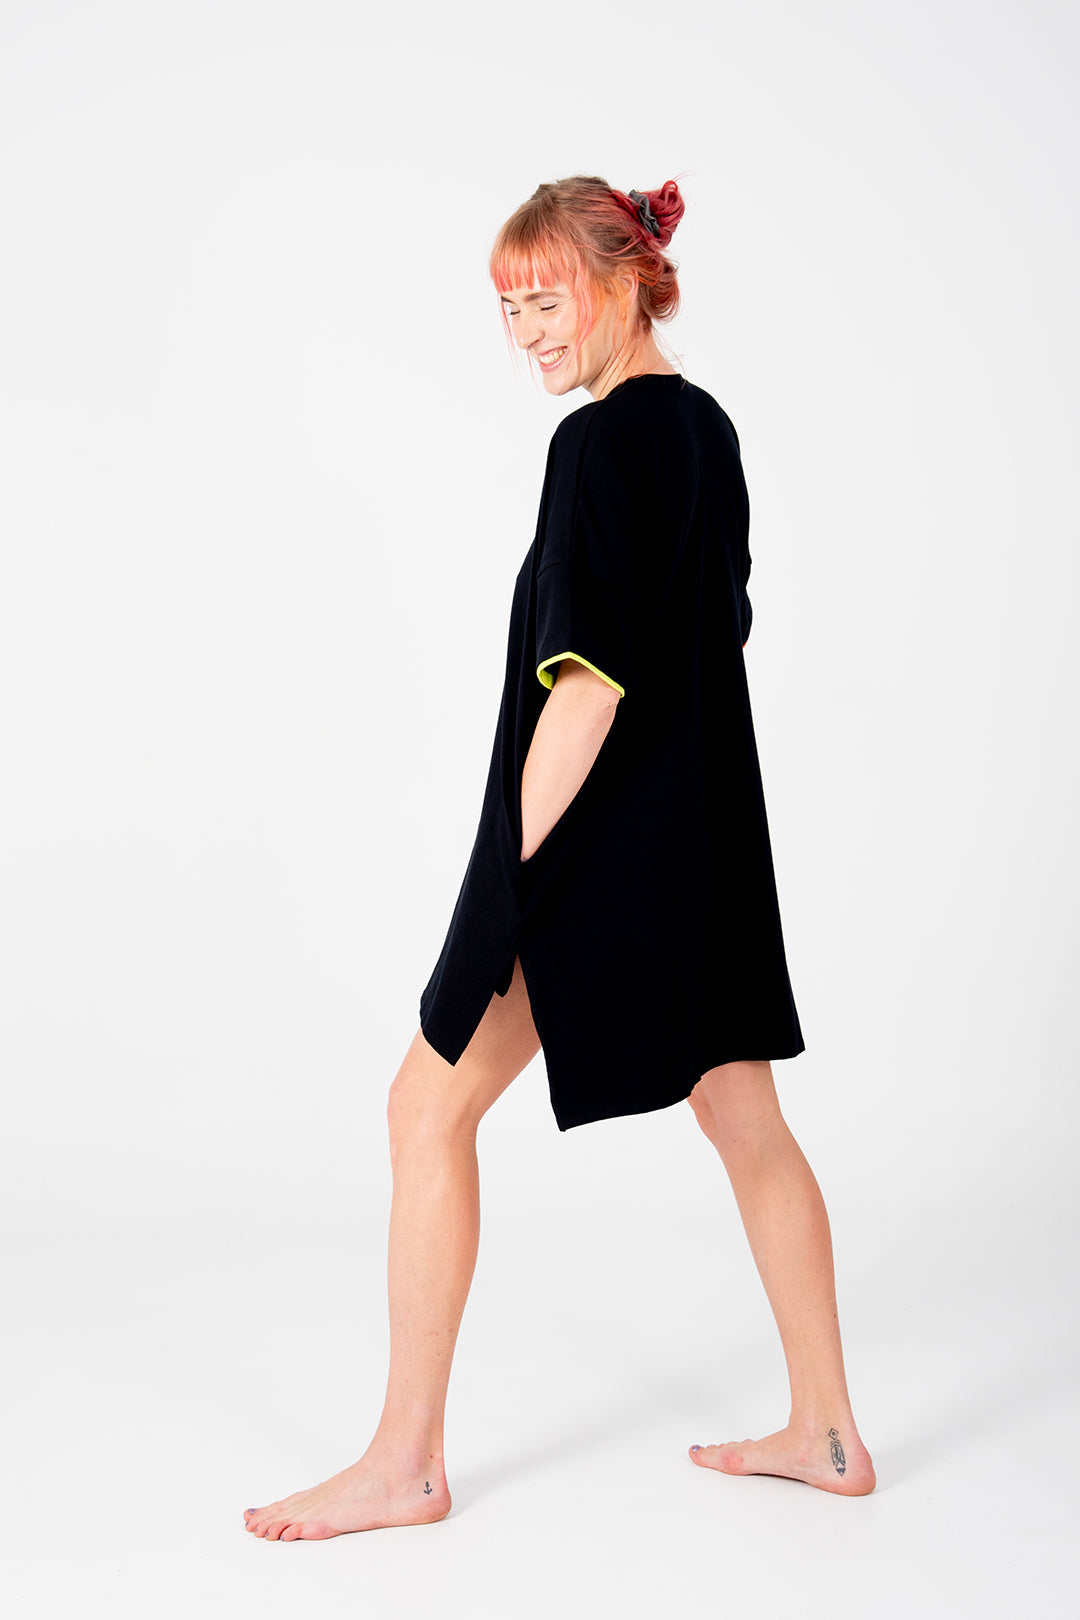 Oversized T-Shirt Dress in Black Flame and Lime